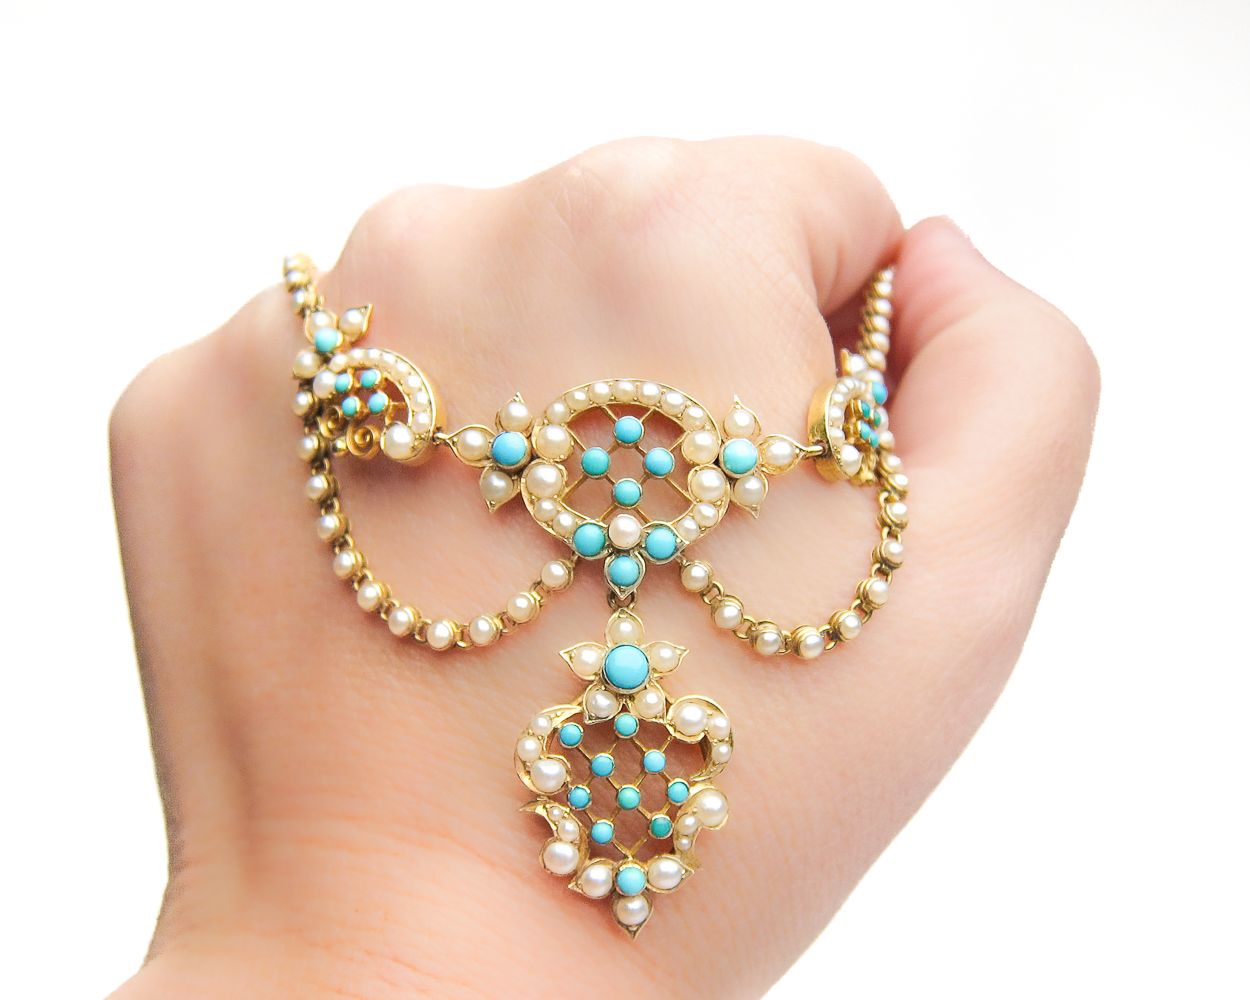 Victorian Pearl & Turquoise Festoon Necklace